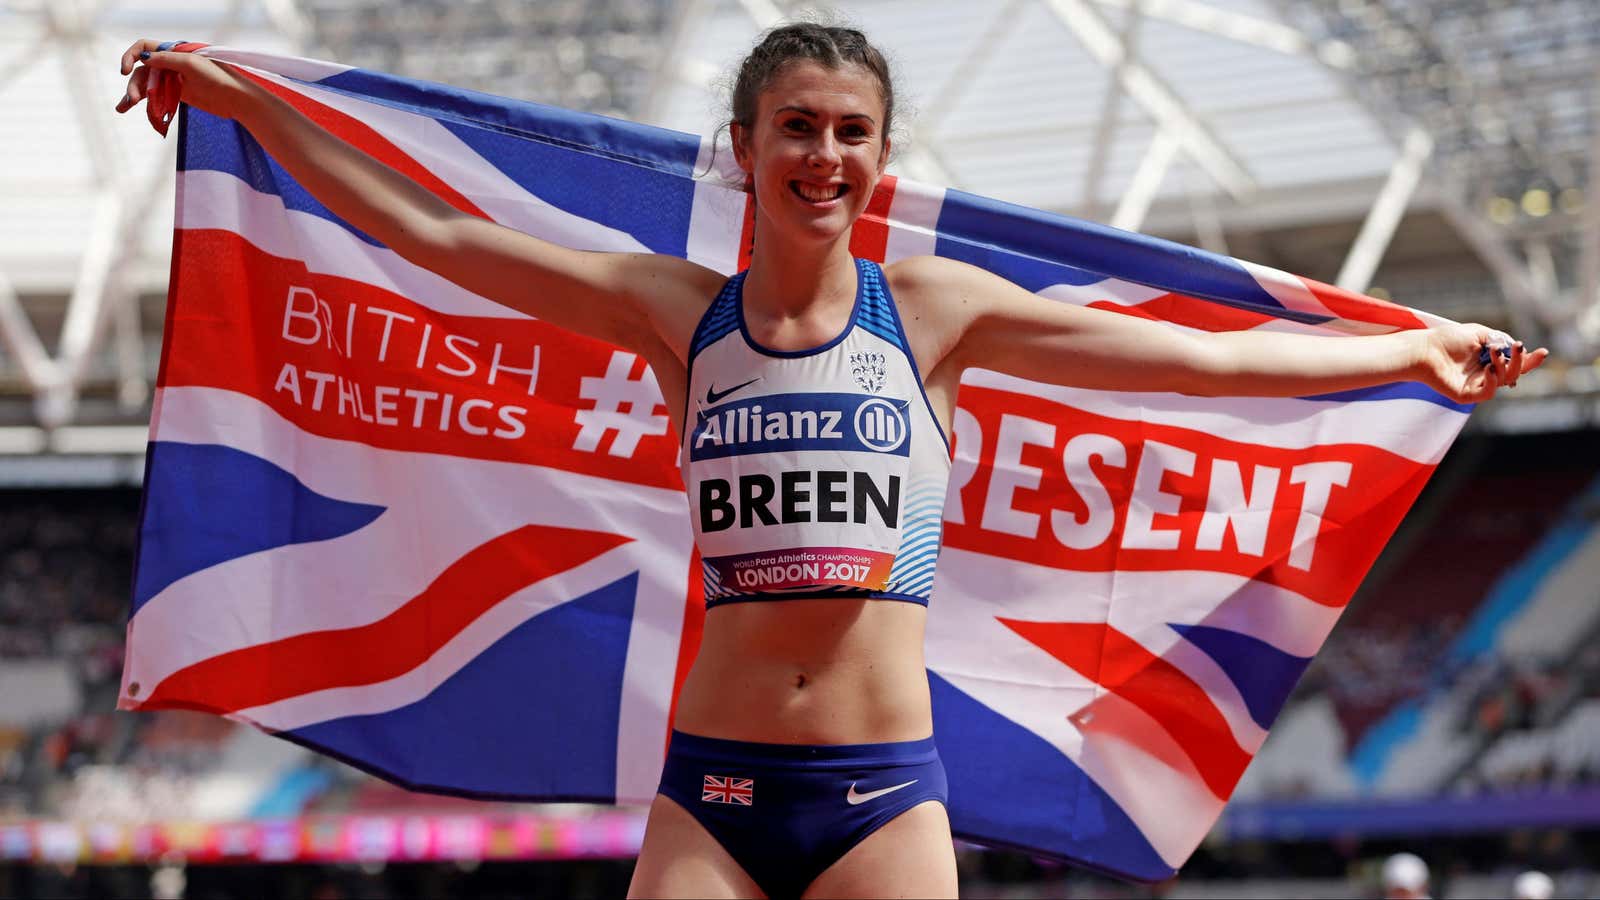 Olivia Breen was “disappointed” to be told by a female official at the England Championships that her shorts were “too short and inappropriate.”